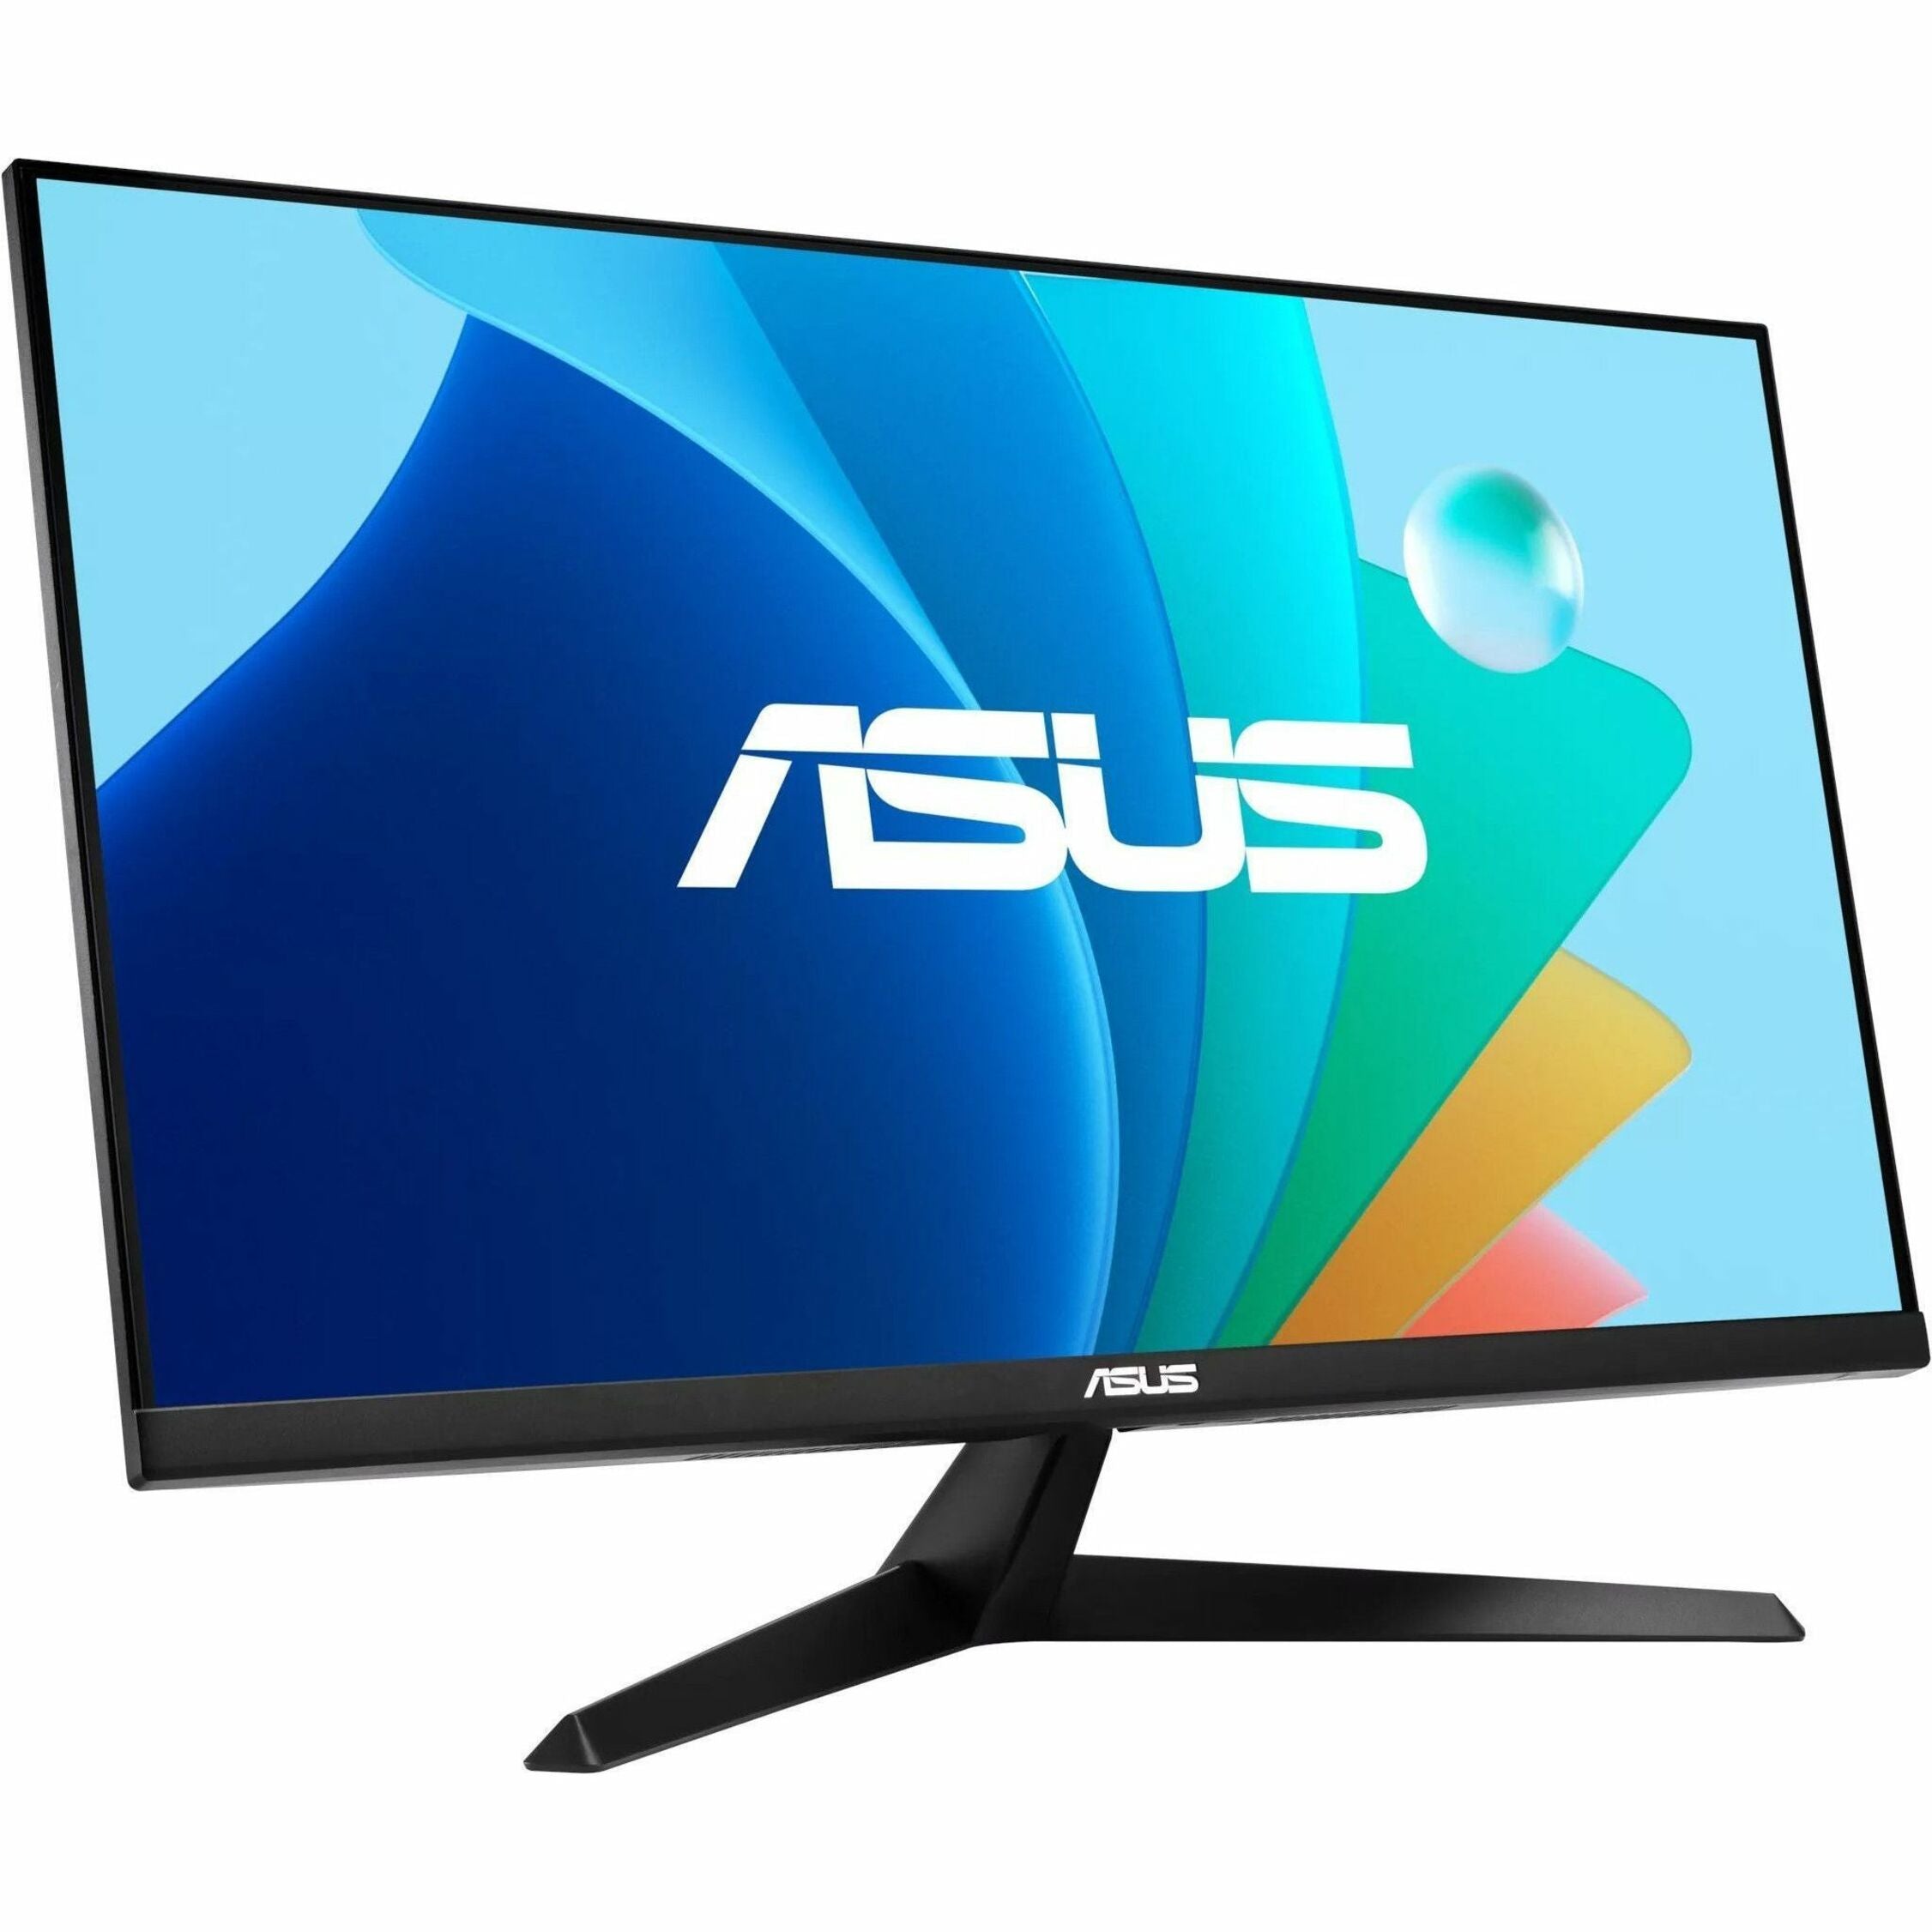 Asus VY279HF Gaming LED Monitor 27, Full HD, Adaptive Sync, TCO Certified, EPEAT Bronze